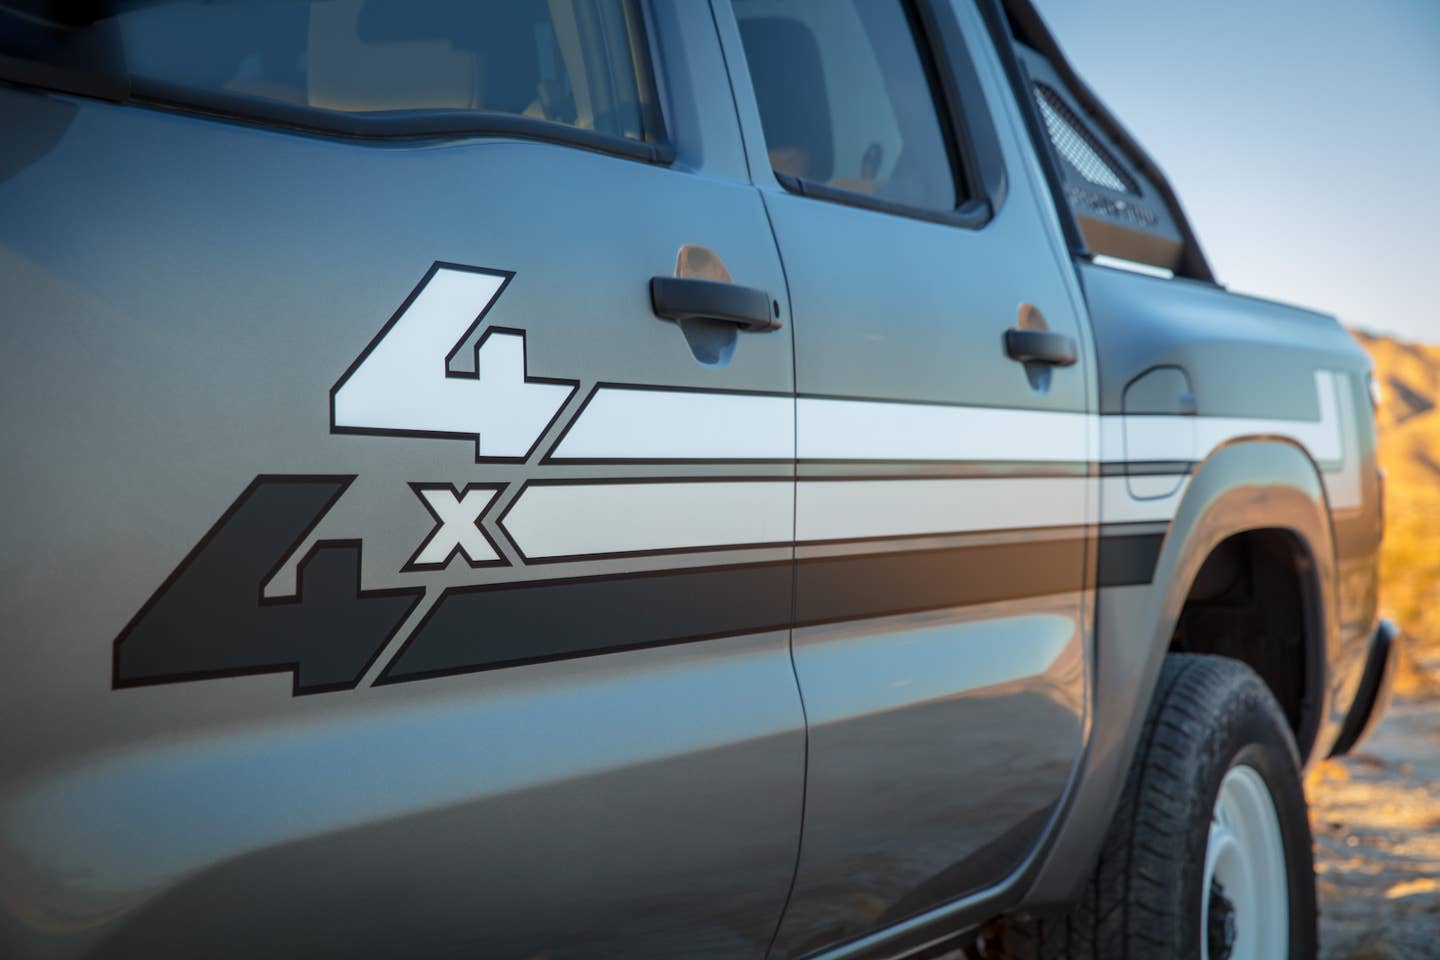 2022 Nissan Frontier Project 72X show truck